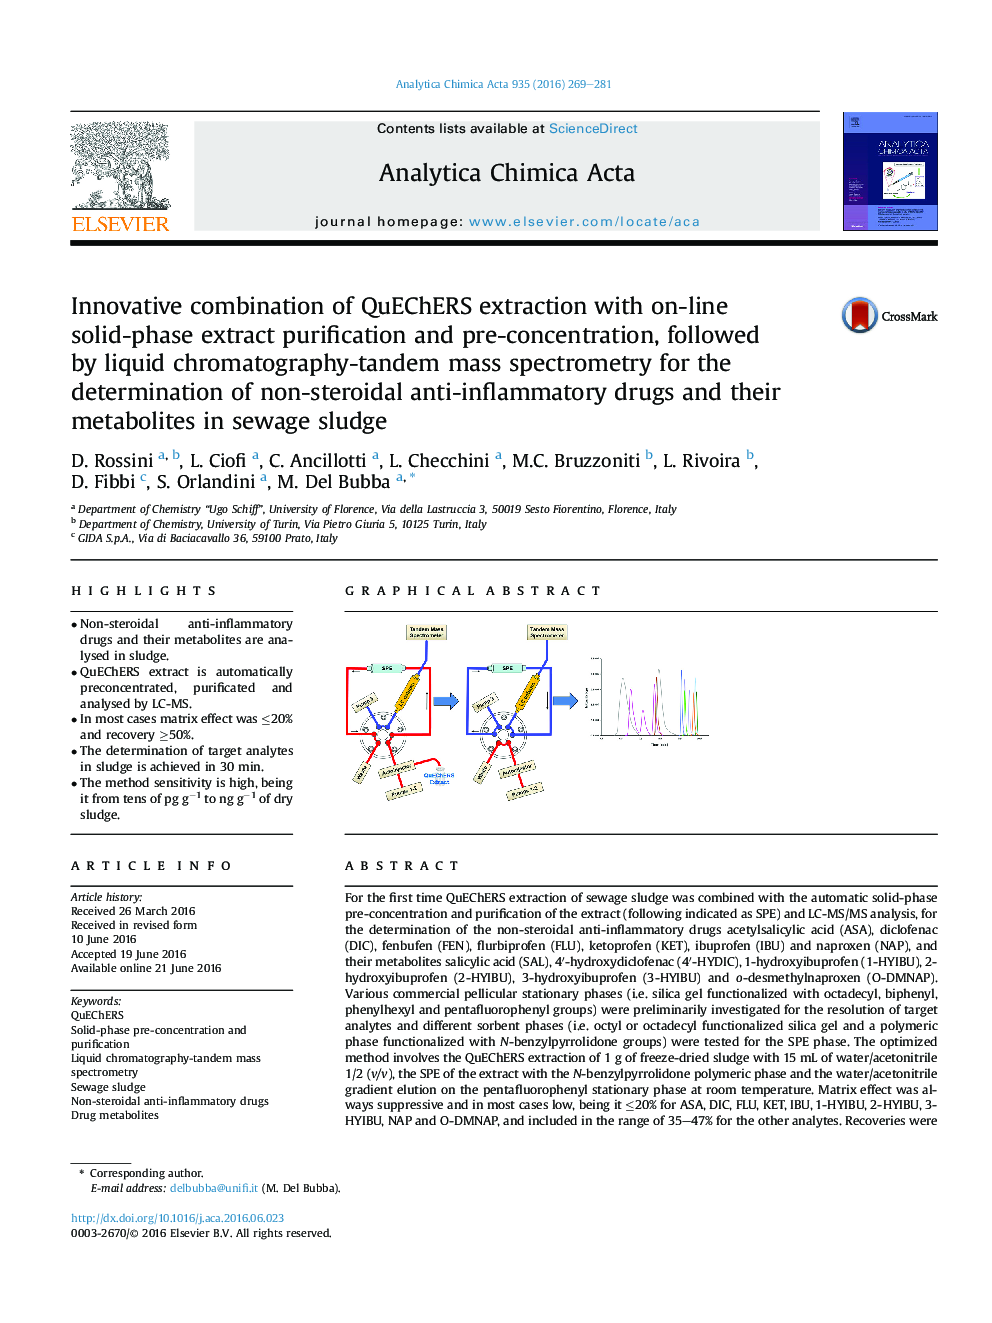 Innovative combination of QuEChERS extraction with on-line solid-phase extract purification and pre-concentration, followed by liquid chromatography-tandem mass spectrometry for the determination of non-steroidal anti-inflammatory drugs and their metaboli